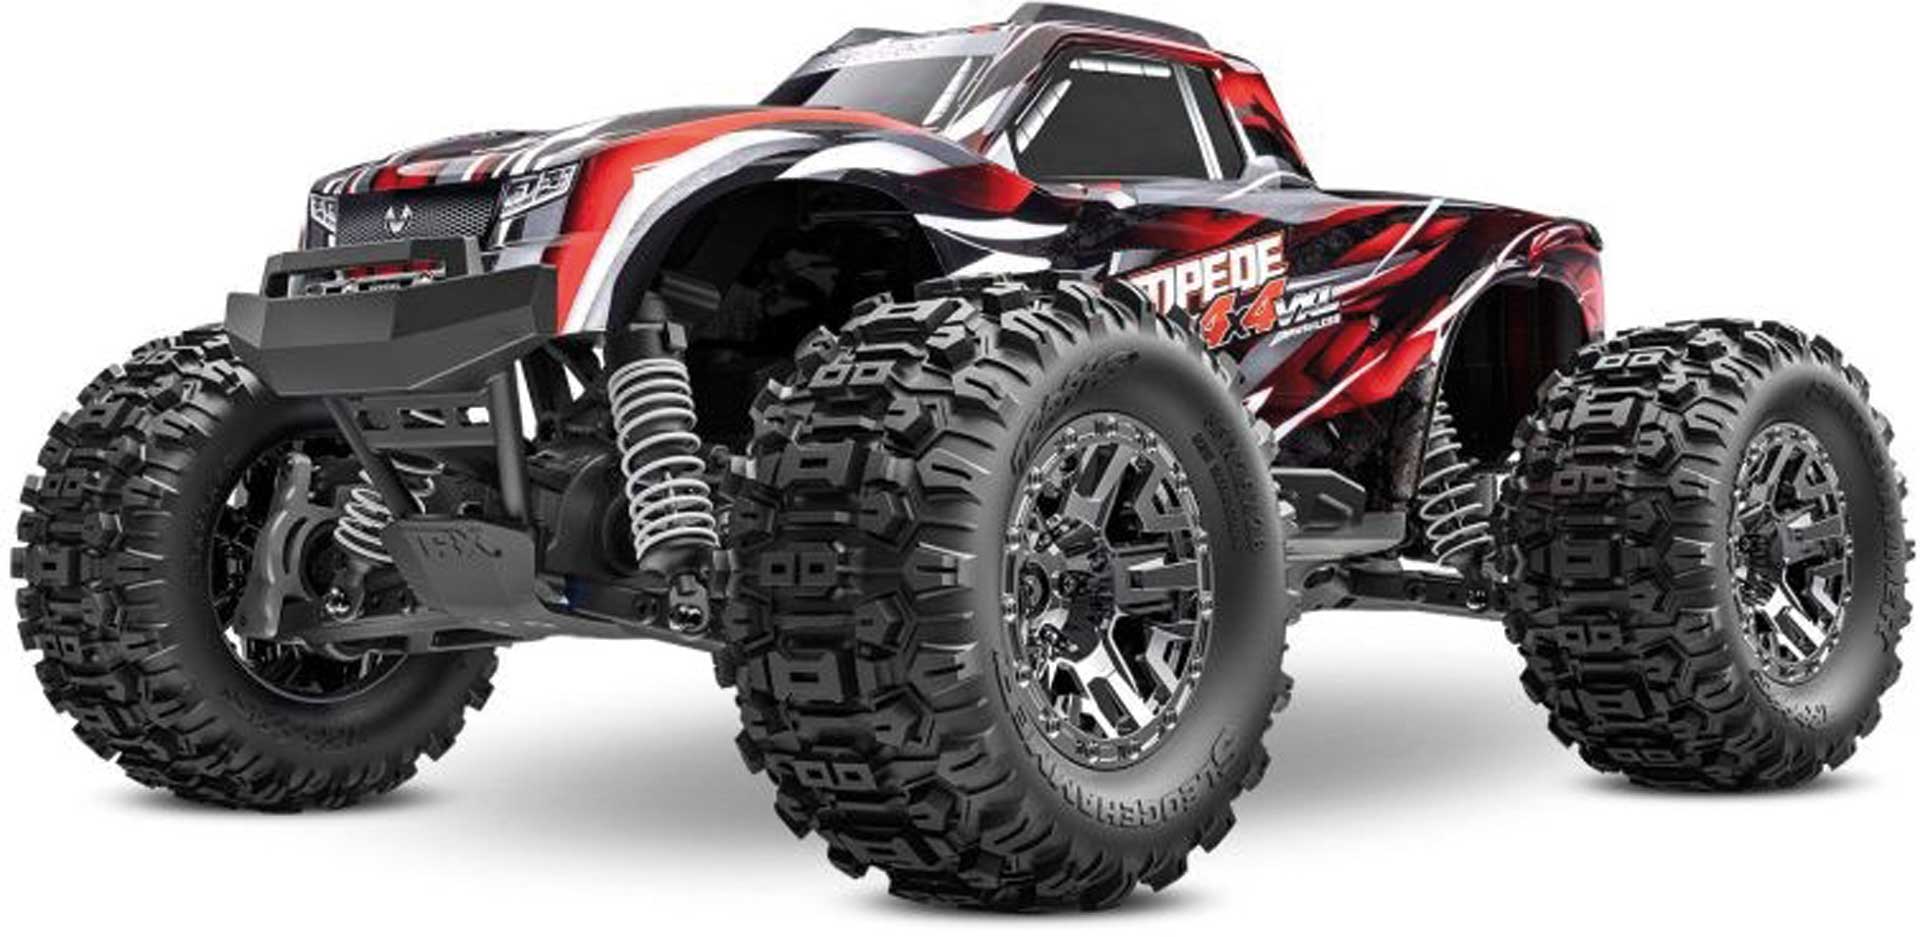 TRAXXAS STAMPEDE 4X4 VXL HD ROUGE 1/10 RTR BRUSHLESS MONSTER-TRUCK SANS BATTERIE NI CHARGEUR, CLIPLESS